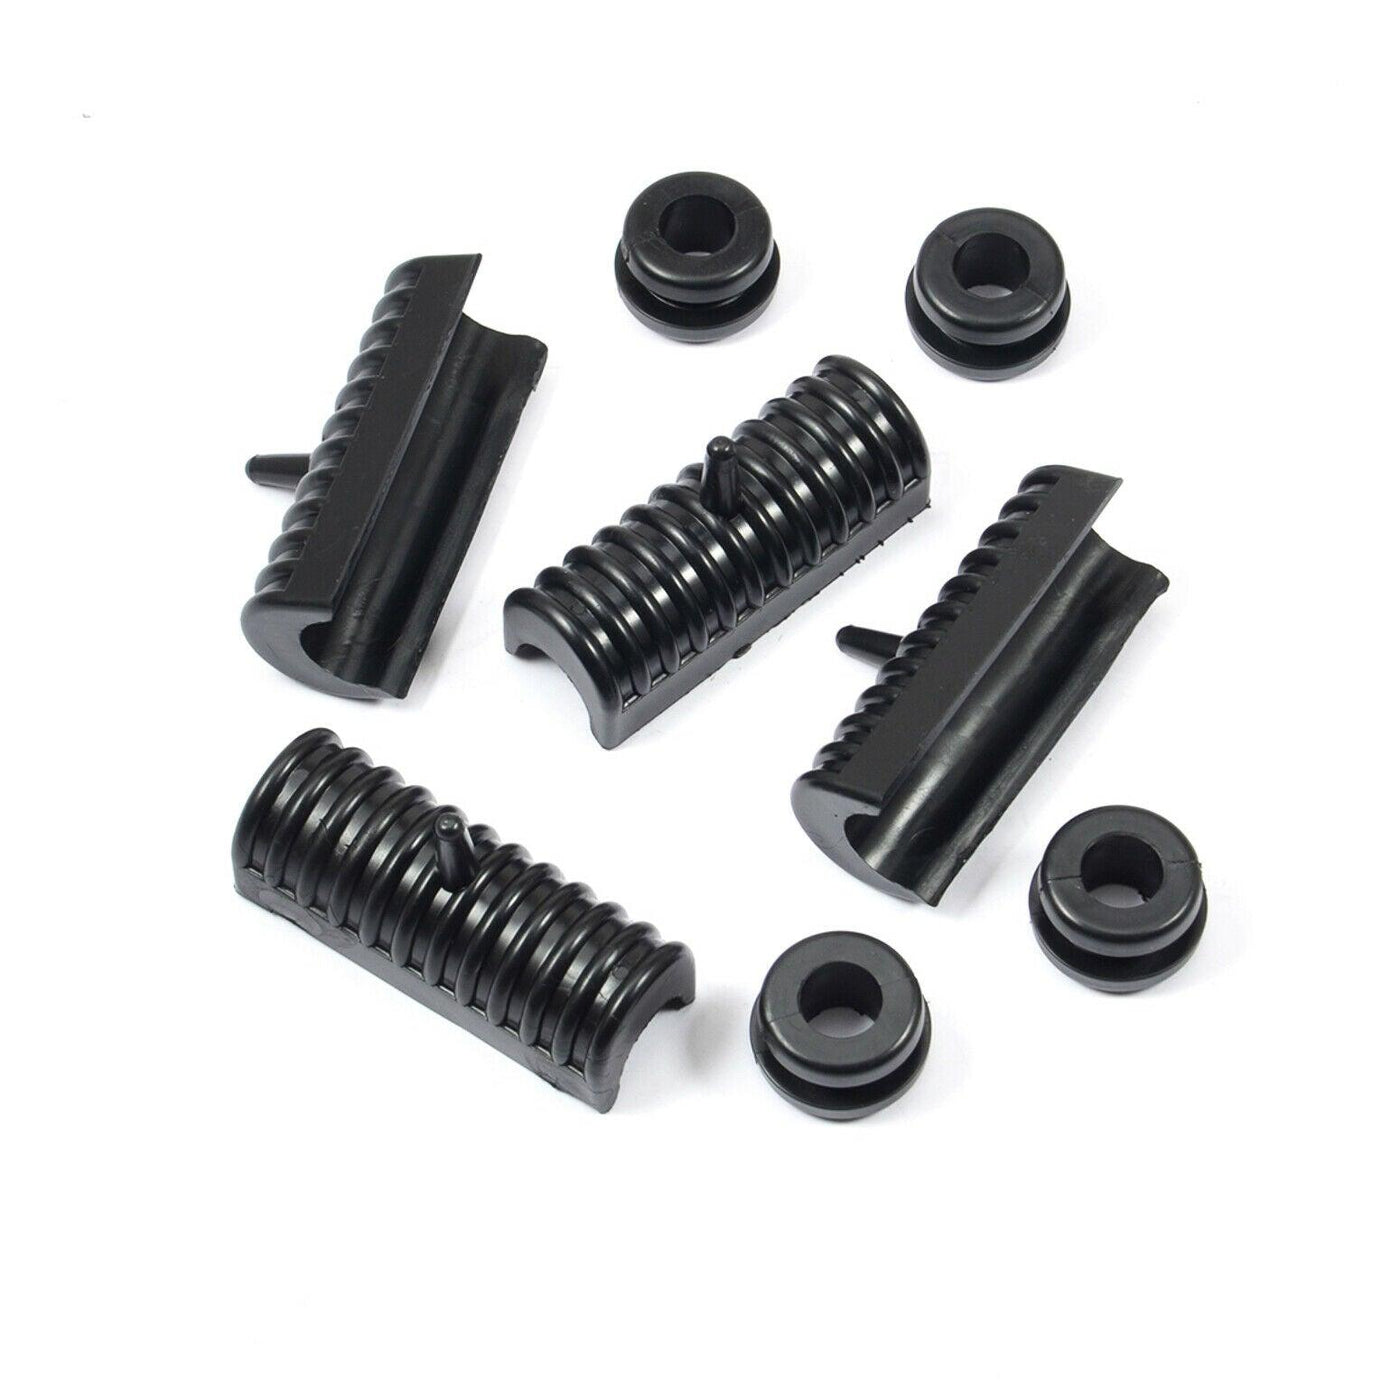 4 PCS Rubber Grommets Support Cushion Hard bags Fit for Harley Saddlebag 1993-13 - Moto Life Products